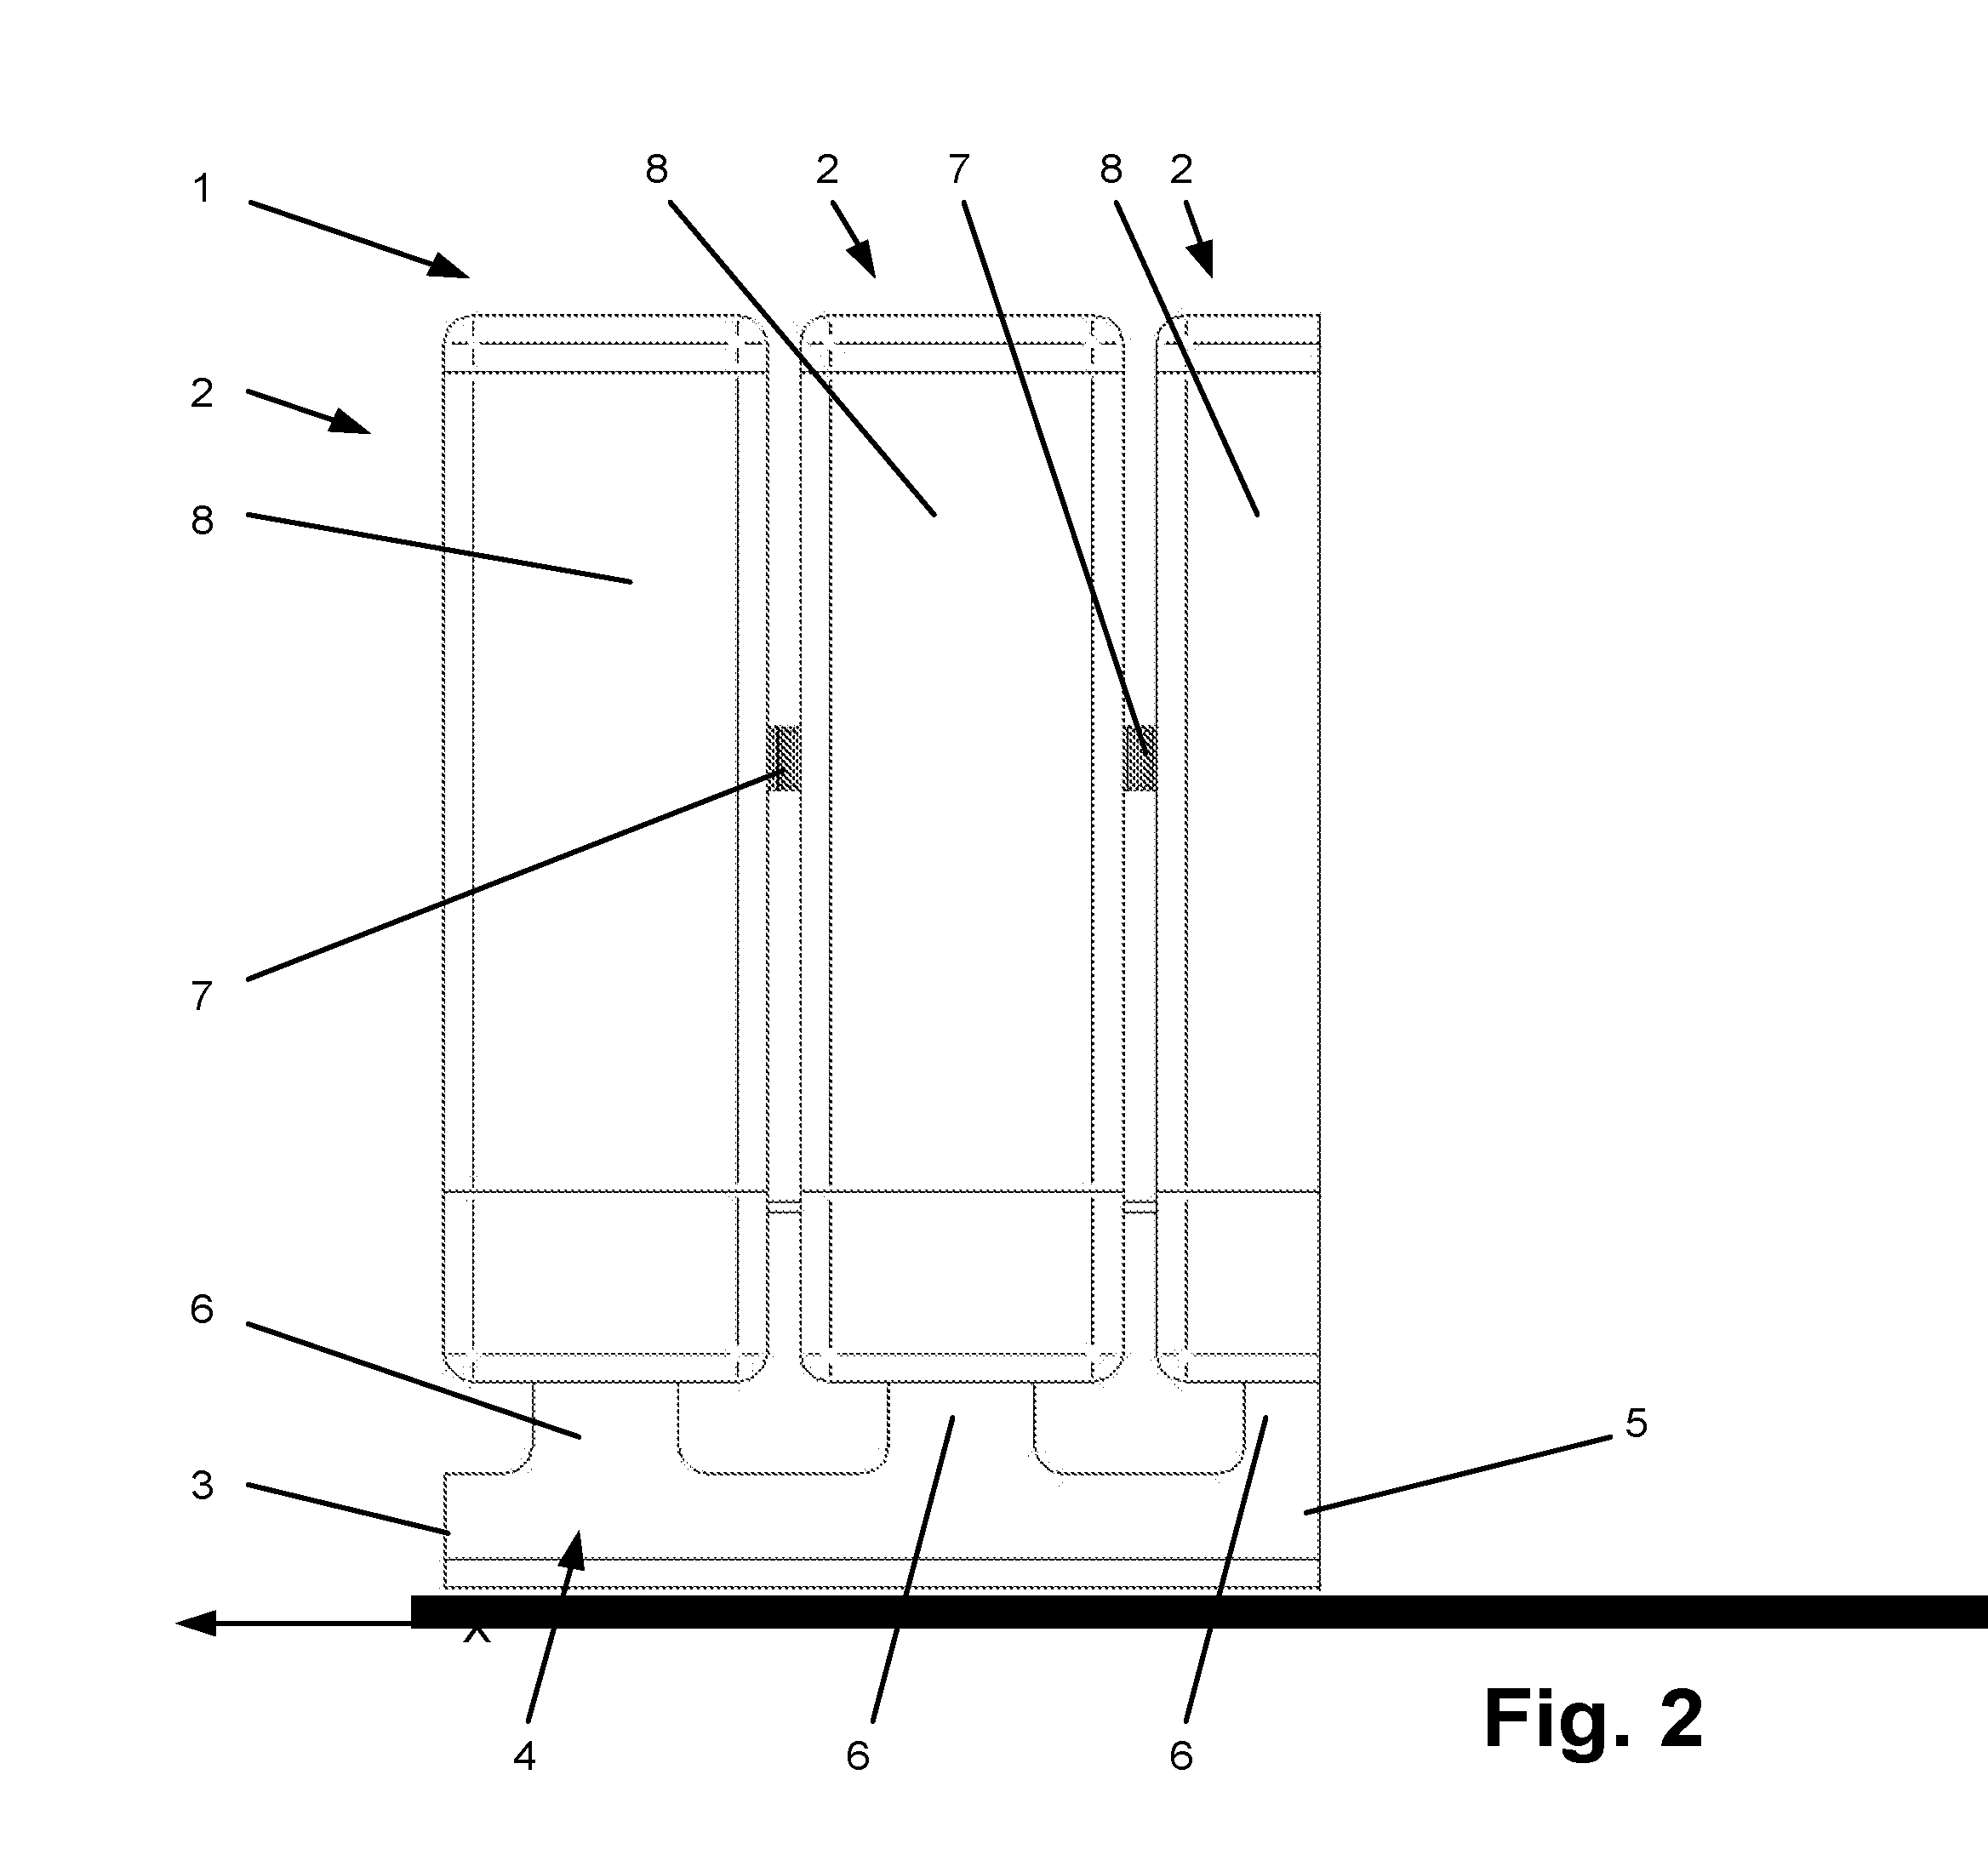 Power electronic switching system